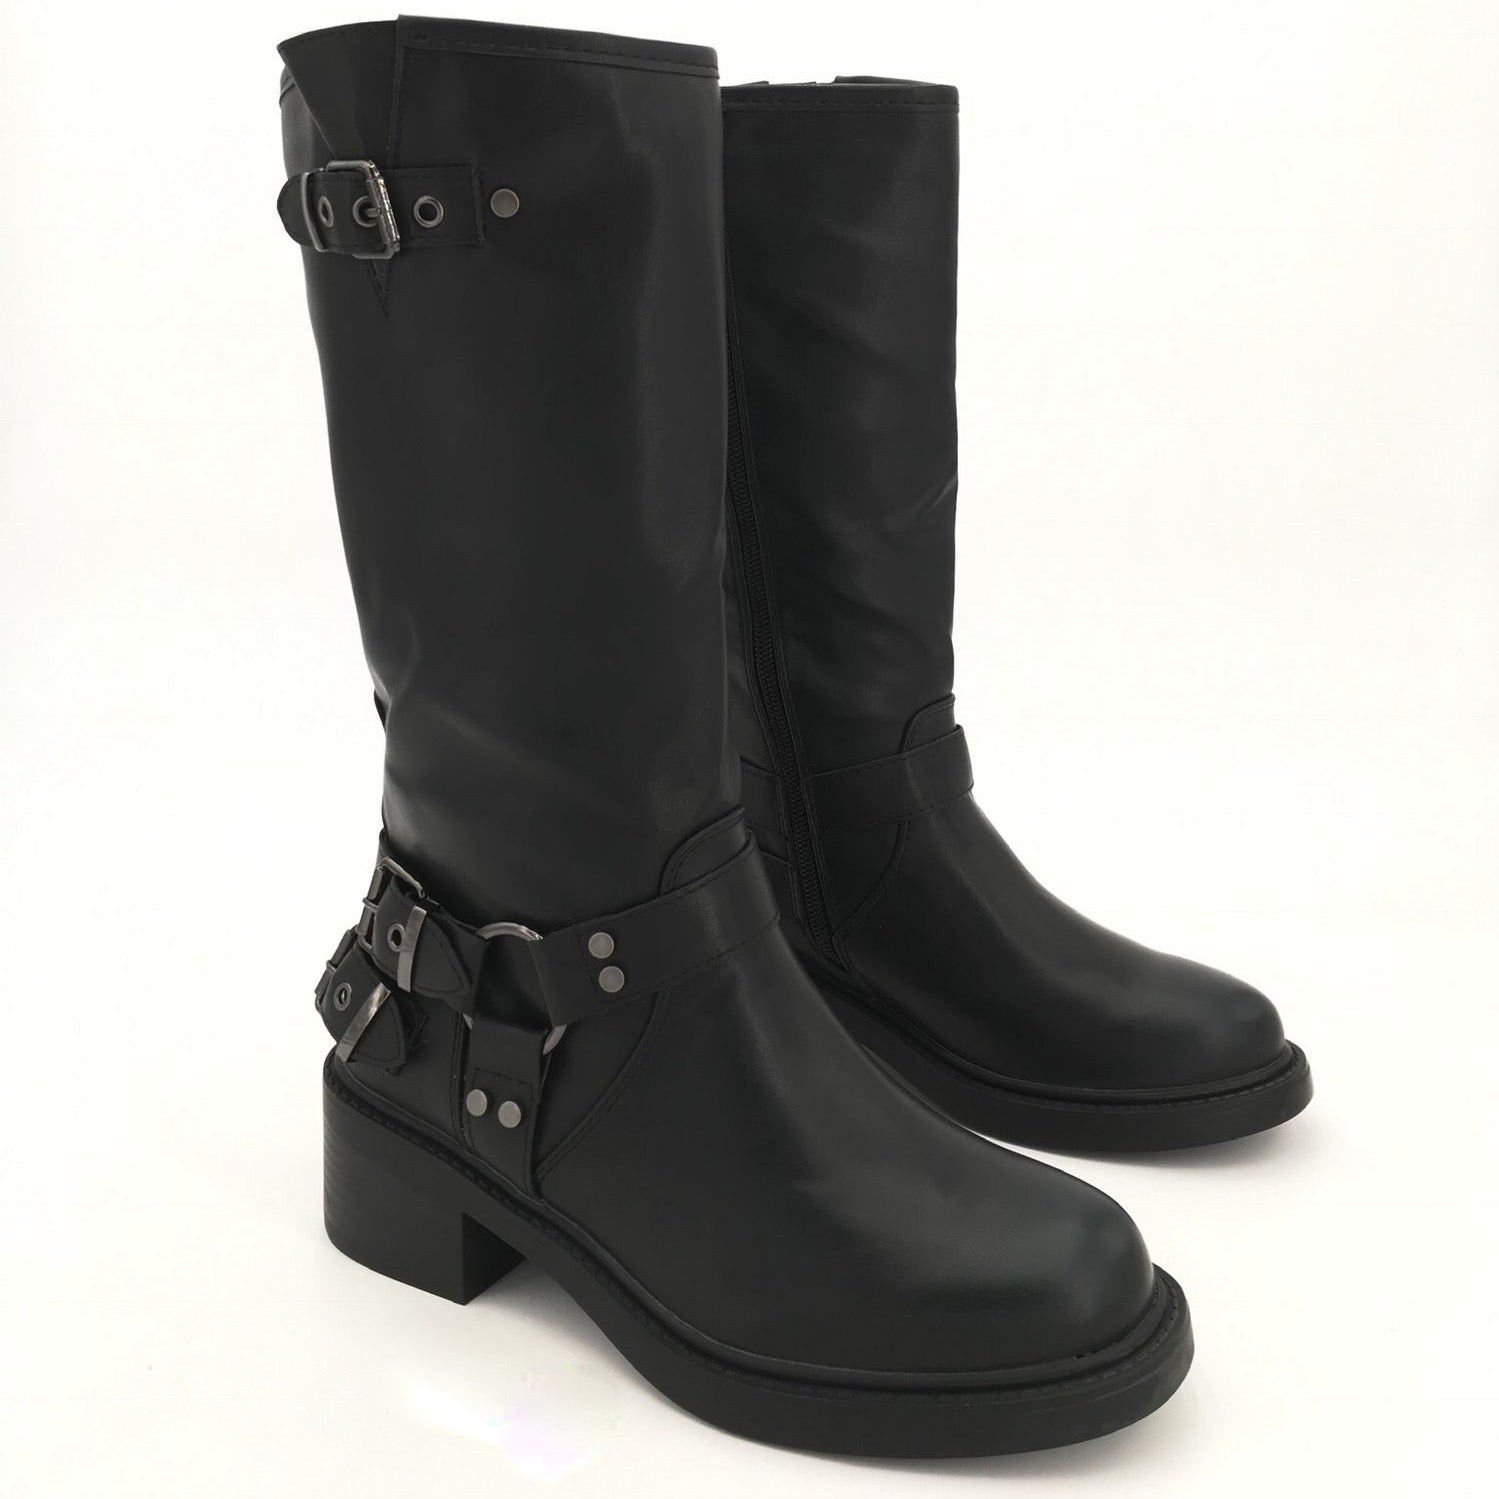 Buckle Black Boots